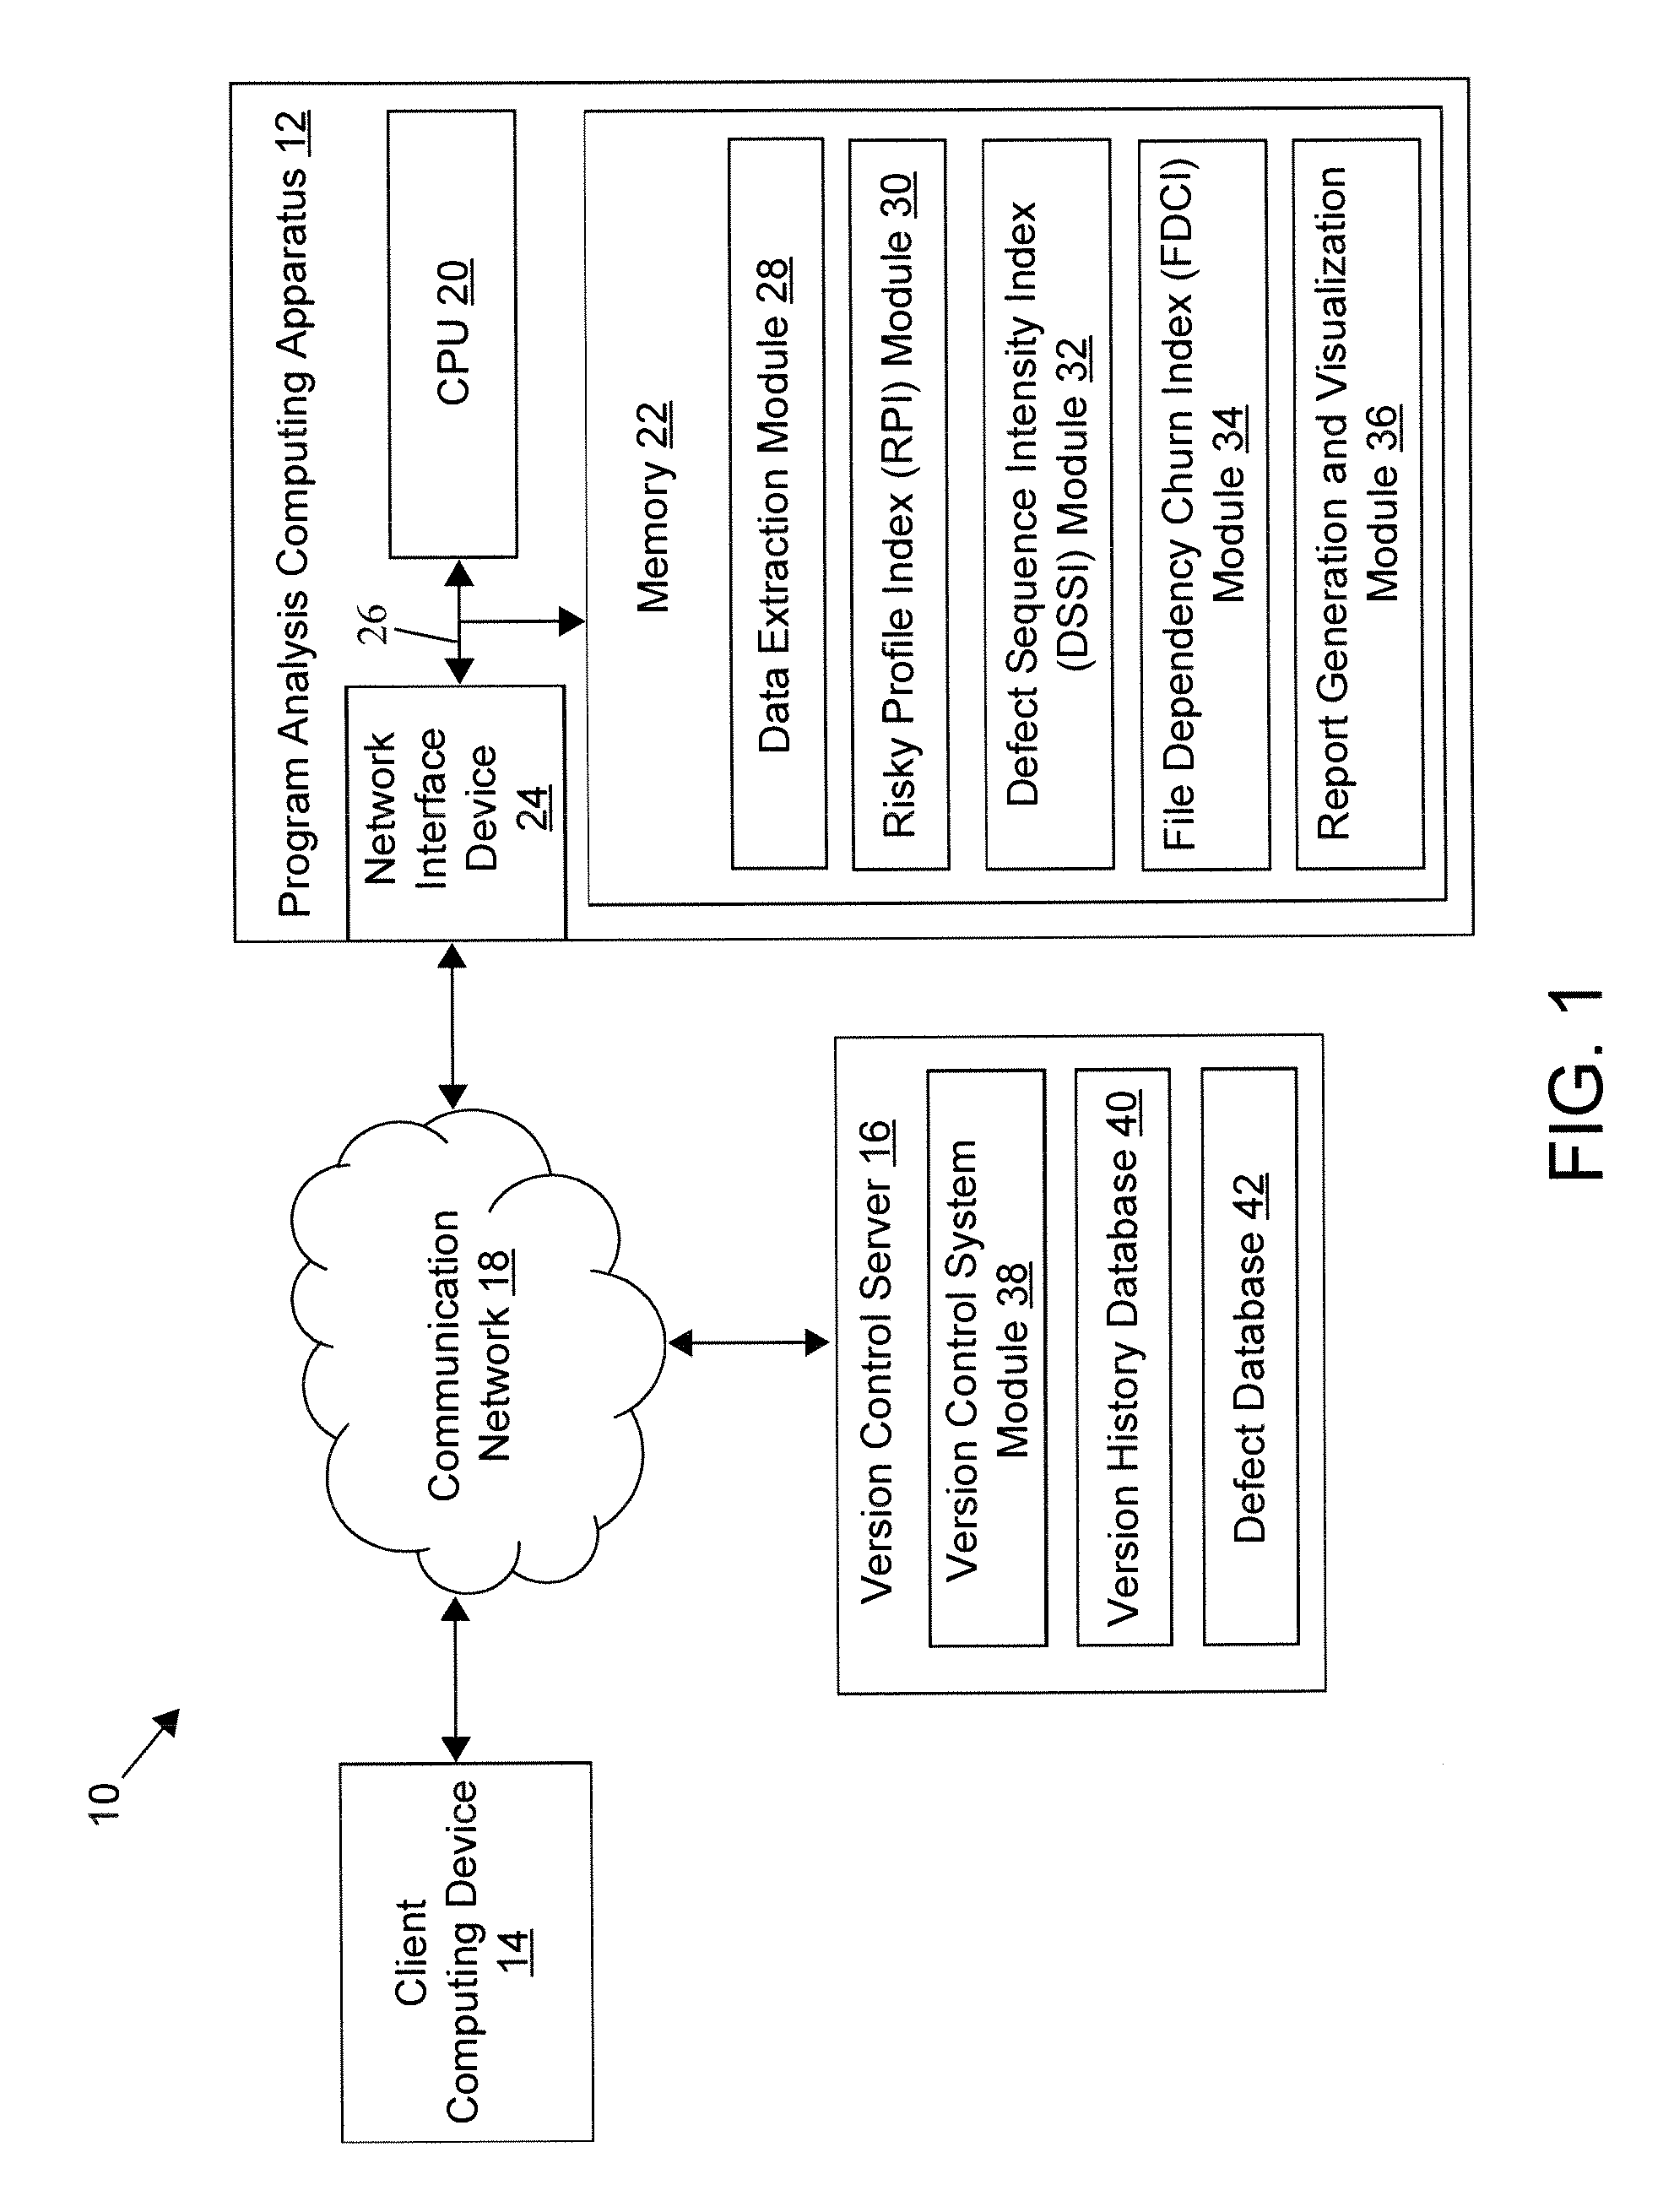 Methods for predicting one or more defects in a computer program and devices thereof